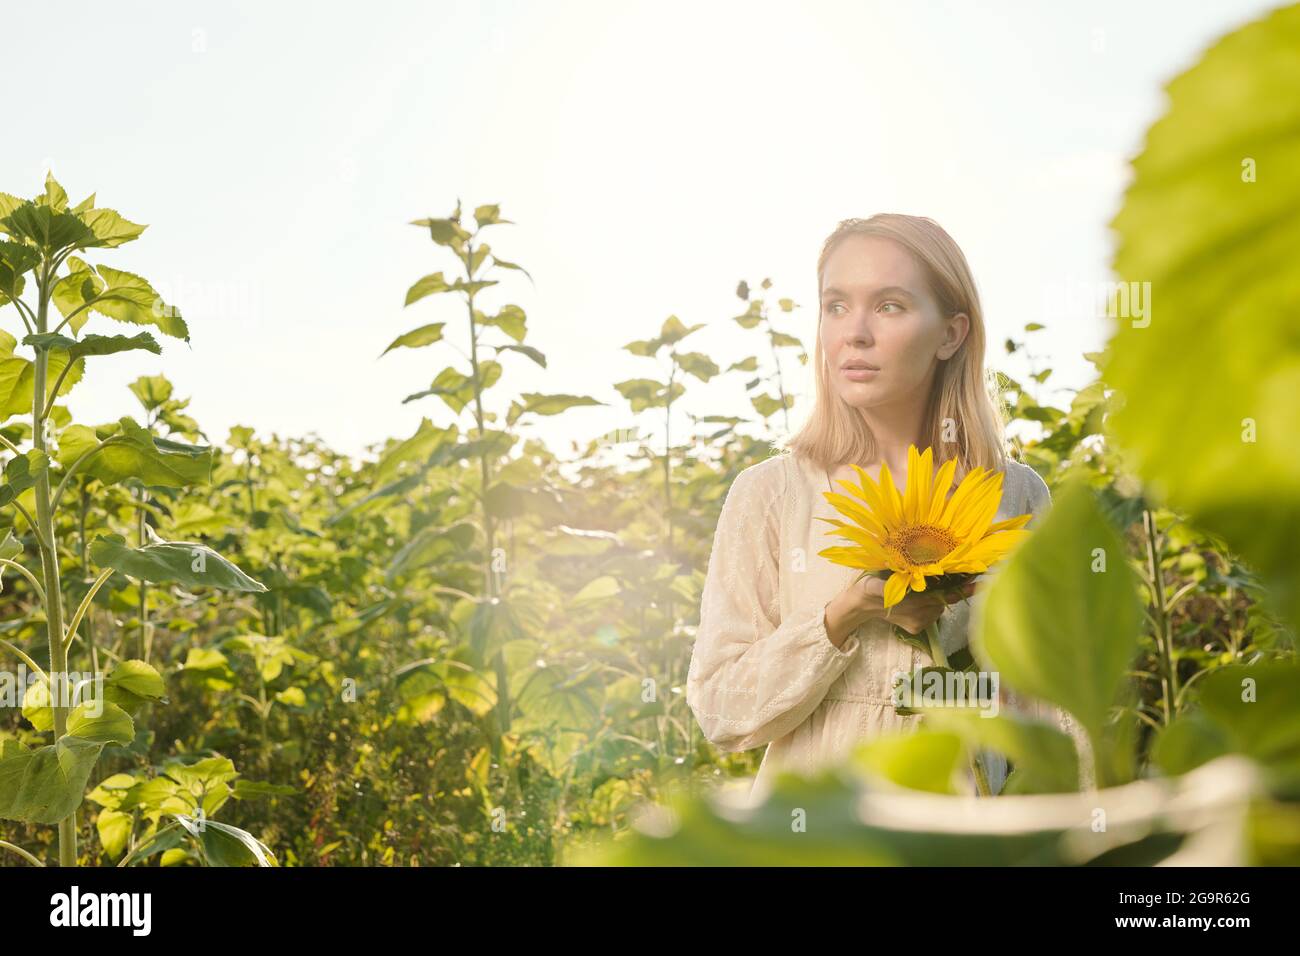 Cheerful young blond woman in white dress standing by one of large sunflowers in front of camera in the field against clear sky Stock Photo